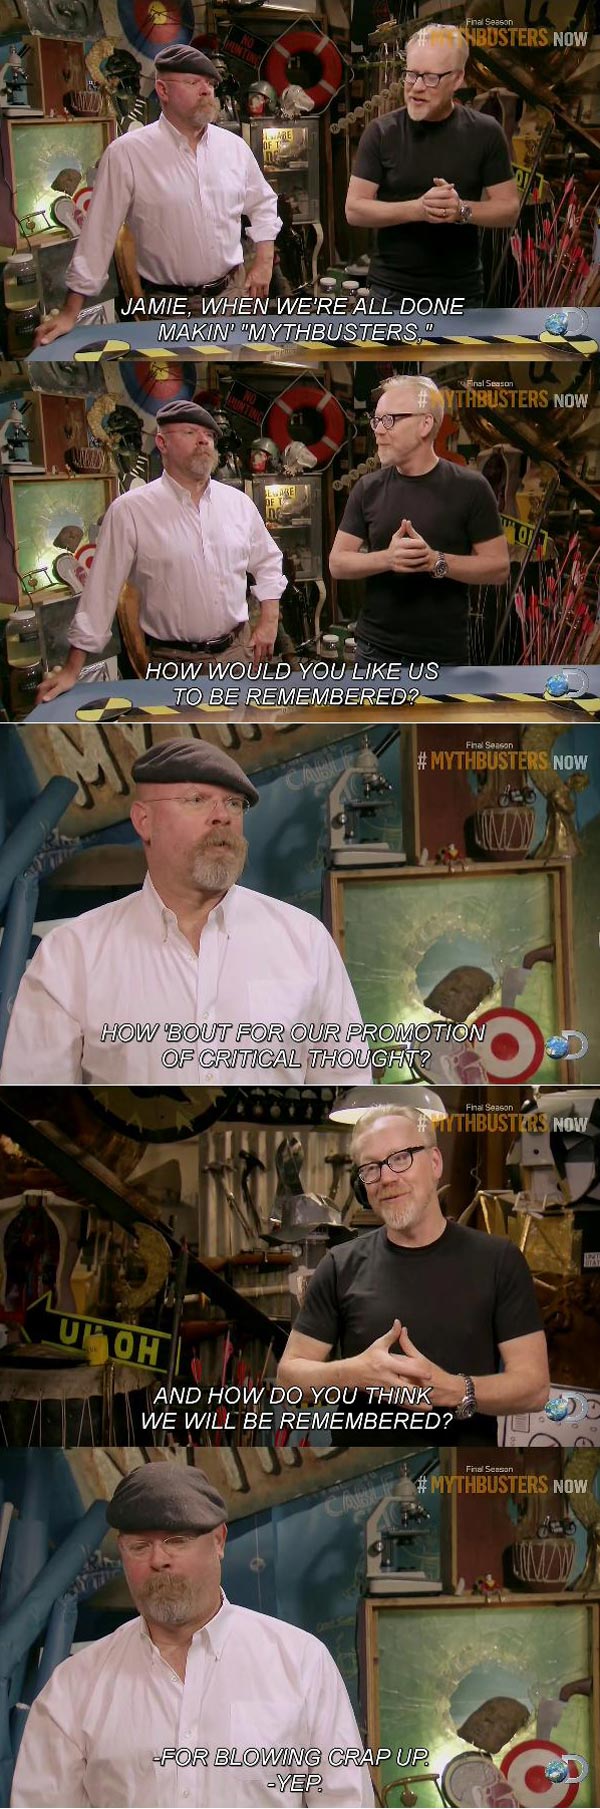 Mythbusters: How do you think we will be remembered?